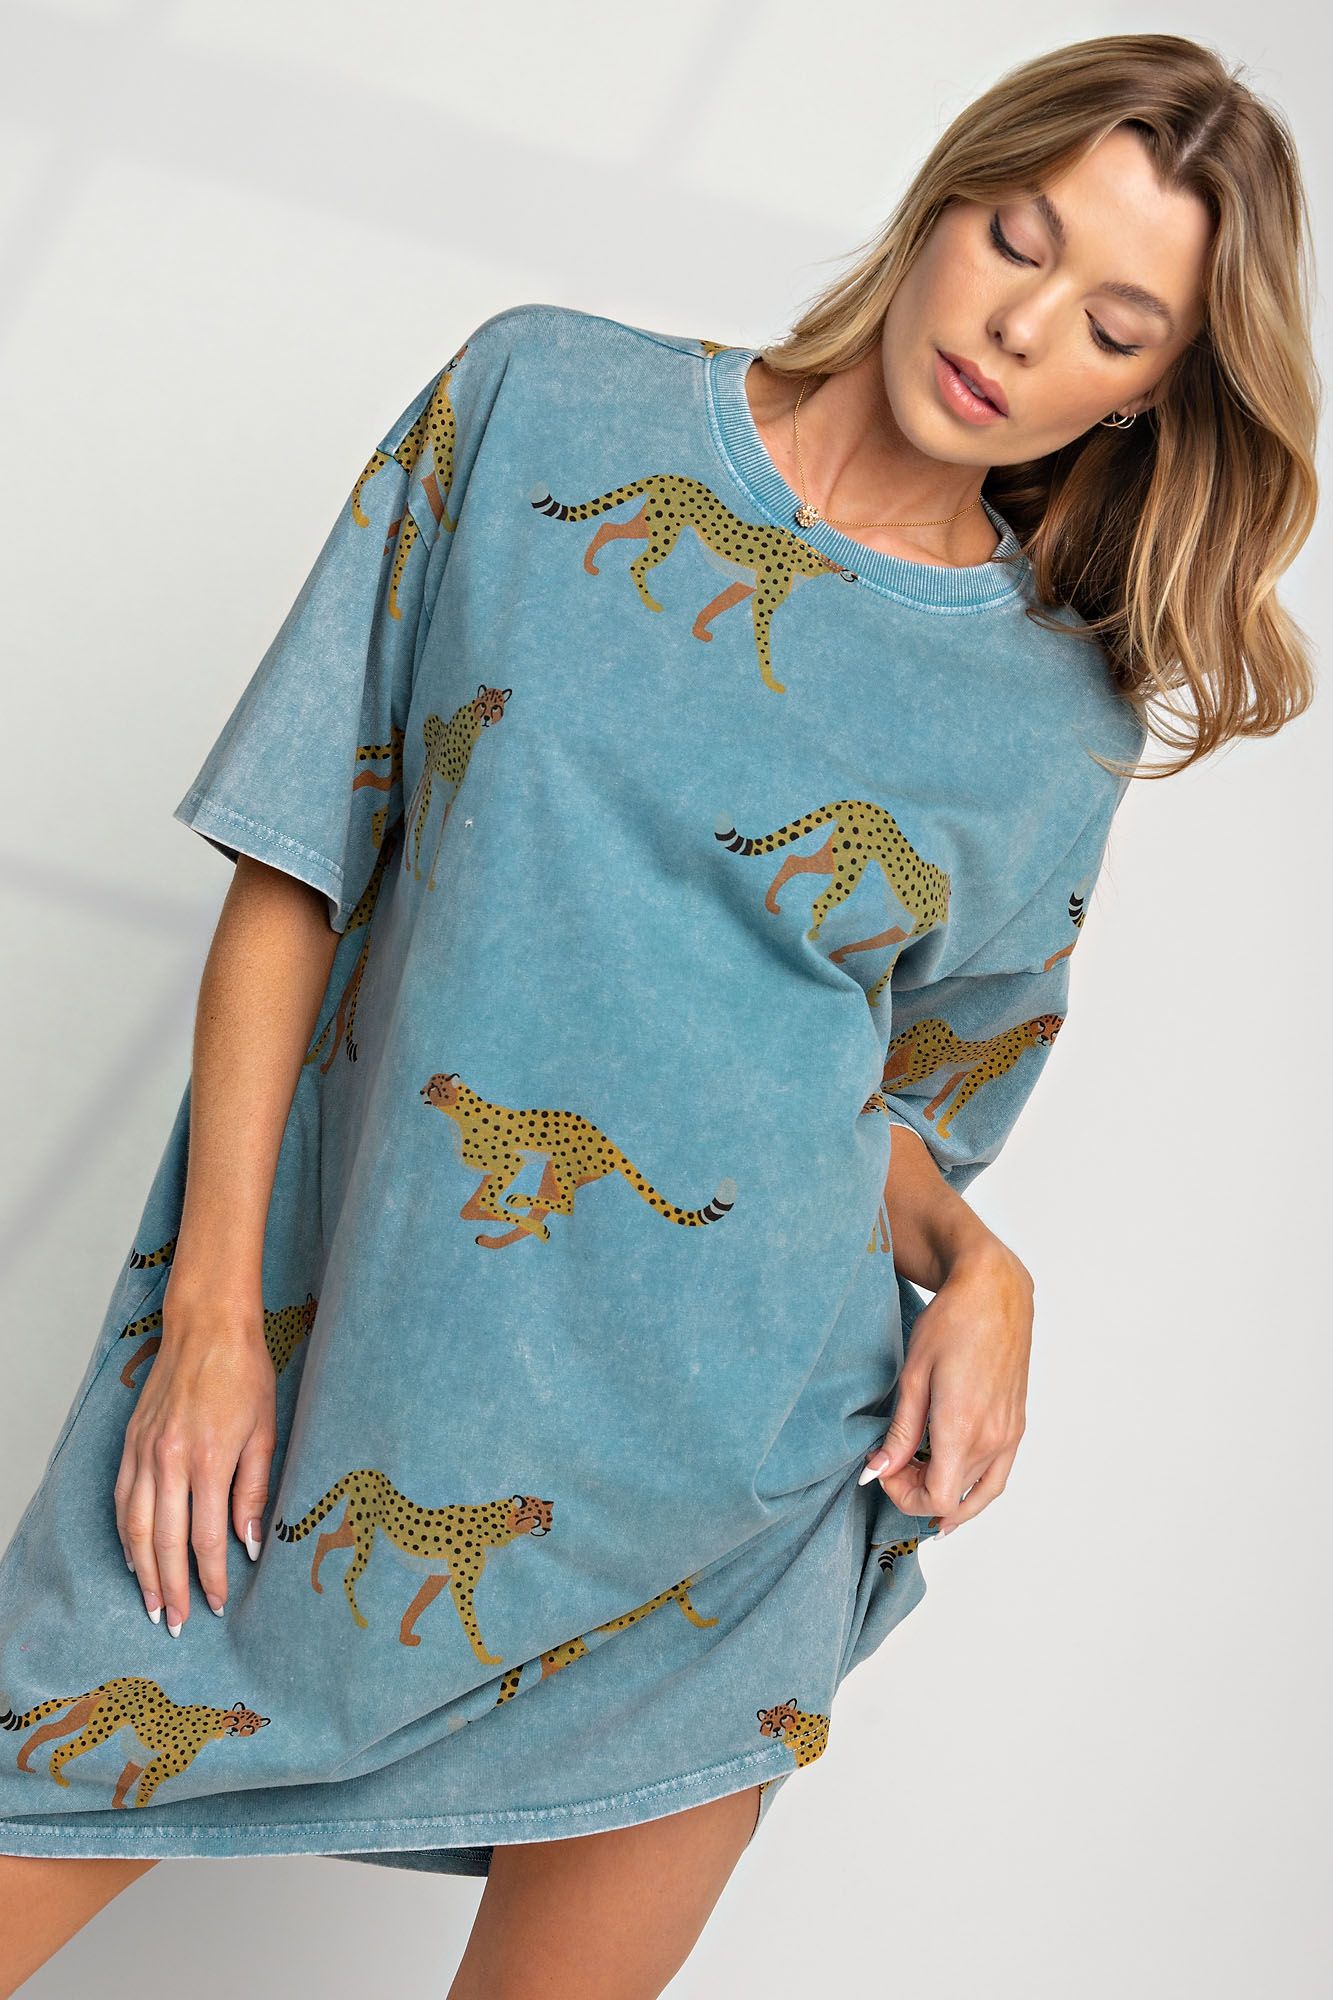 In the Wild Mineral Washed Cheetah Print T Shirt Dress in Washed Denim